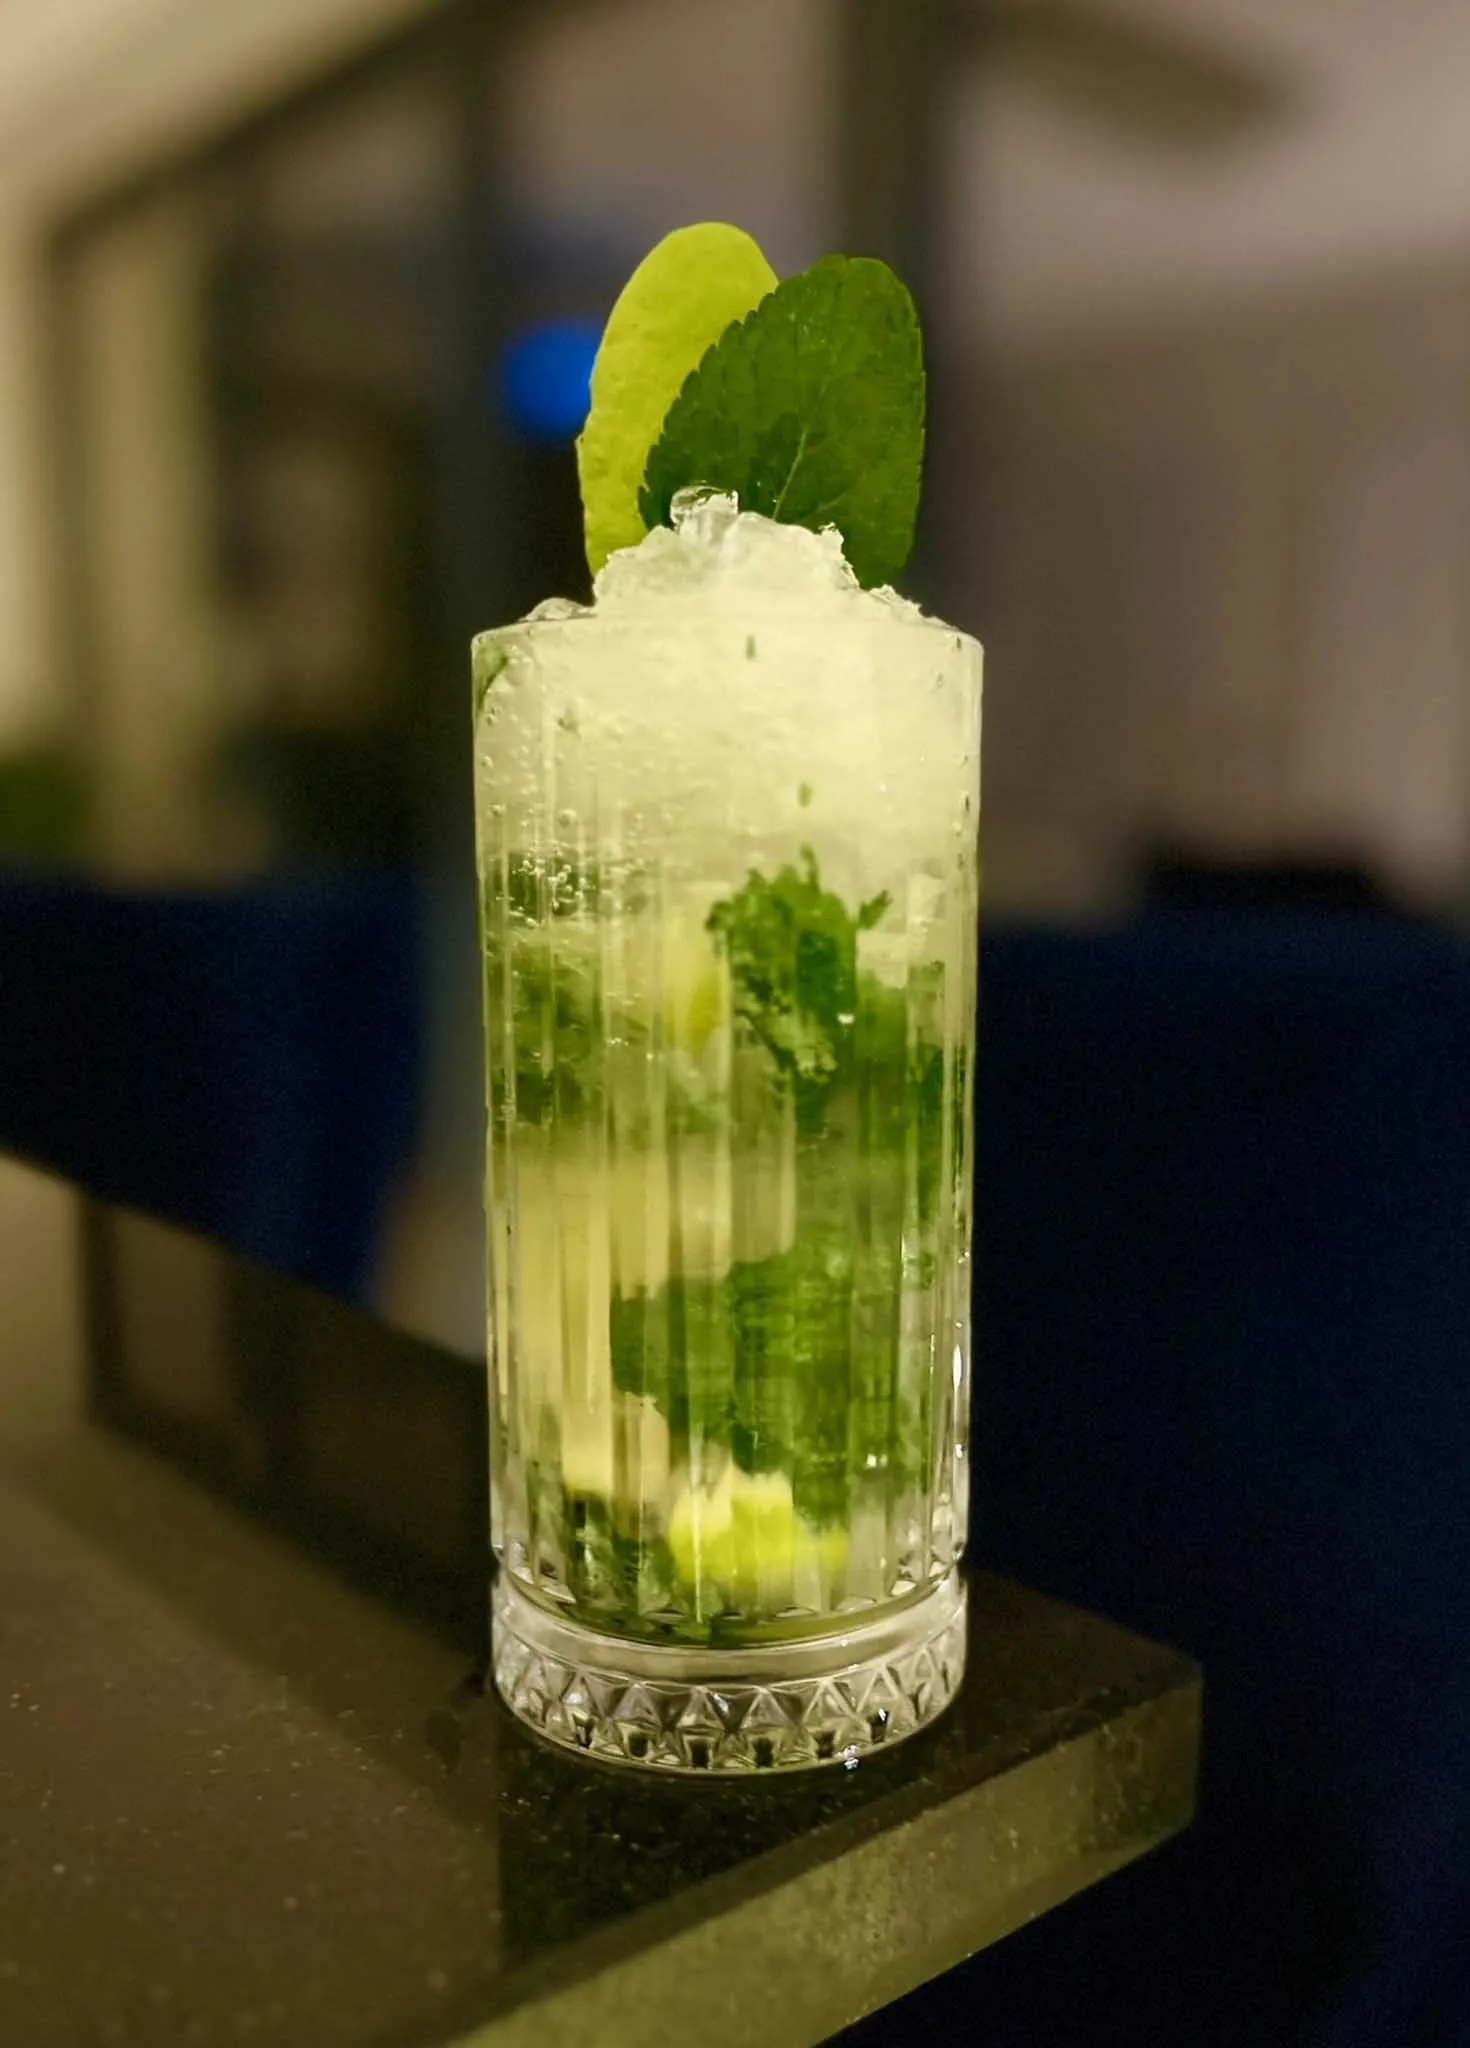 A glass of green drink with a lime wedge on a table.